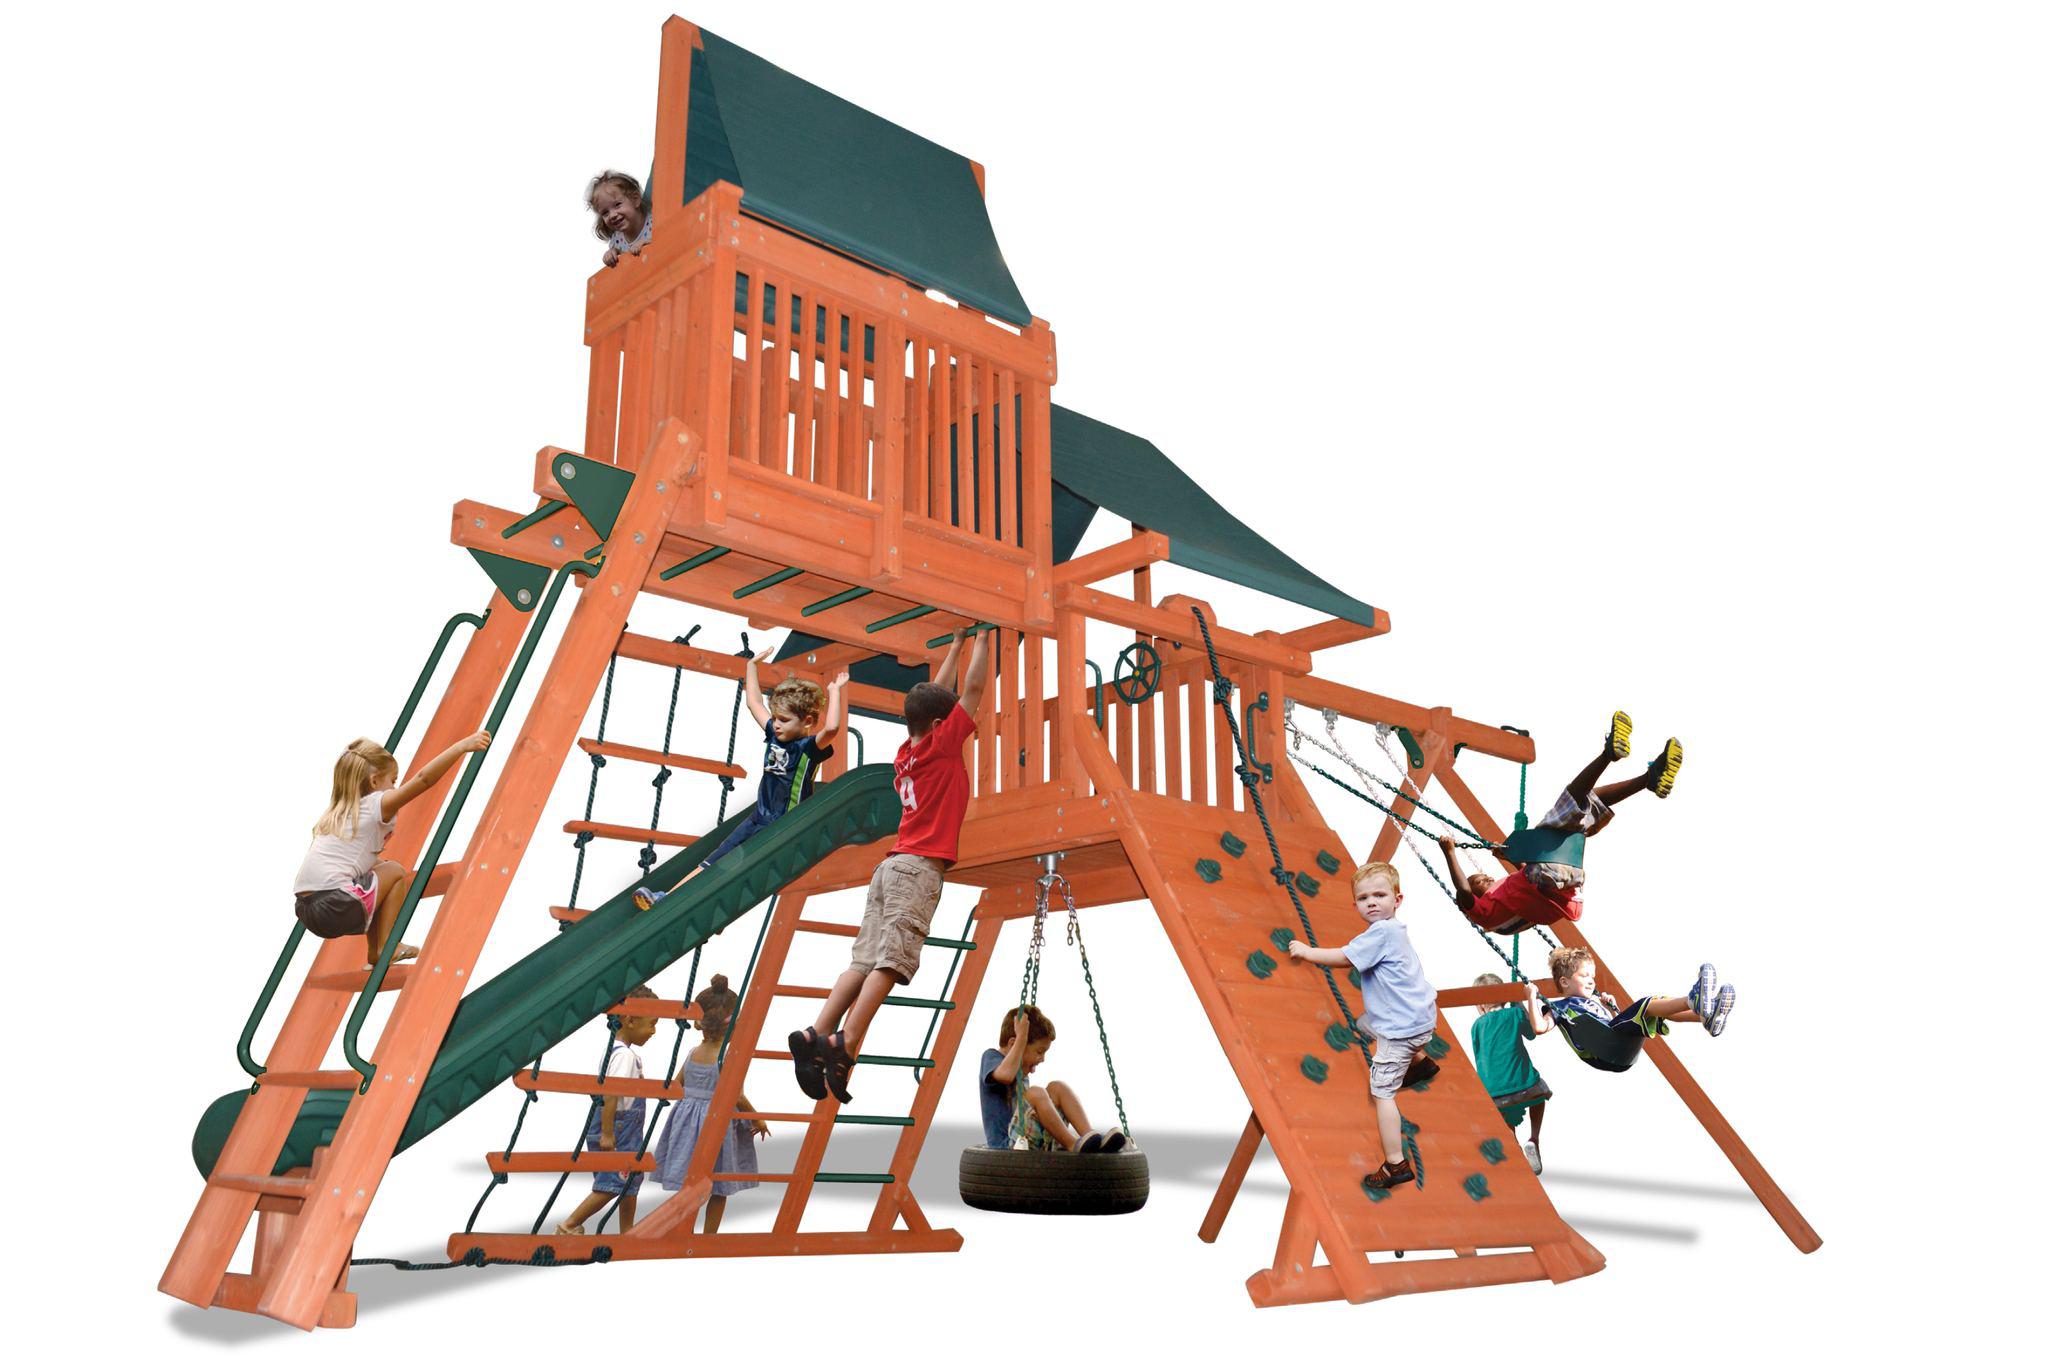 The Playground One Turbo Original Playcenter Combo 4 is the definition of a complete activity center.
This swing set has it all!  From the rockwall to the step/rung entry ladder to the 360° tire swing plus a huge monkey bar with the 2nd level skyloft on top of the monkey bars will entertain your children for hours.
Call (615) 595-5582 to start building backyard memories that last a lifetime